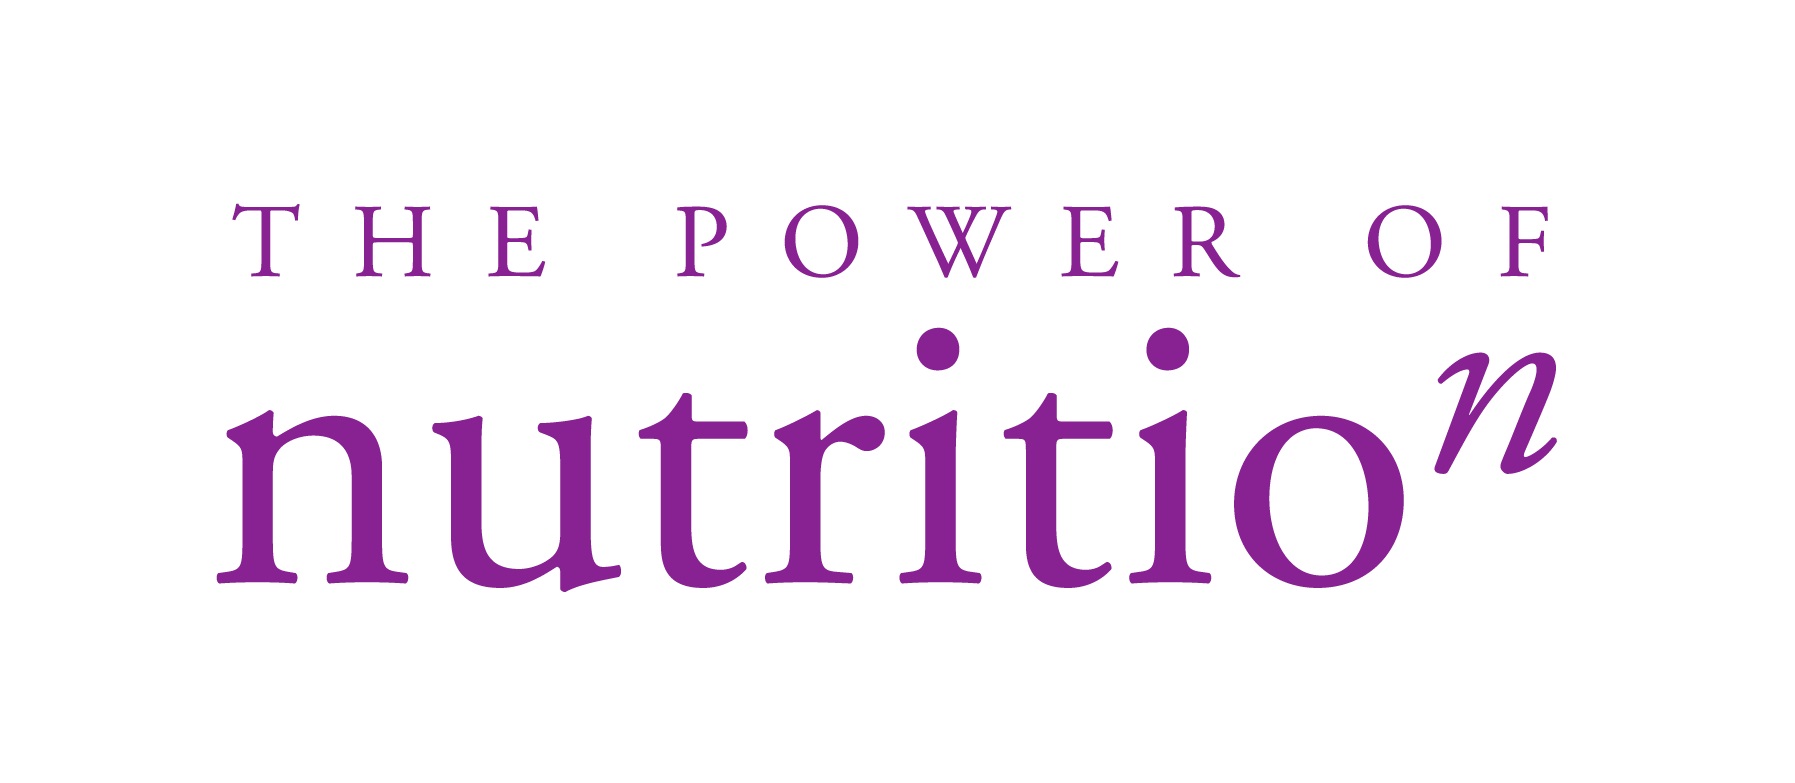 Power of nutrition